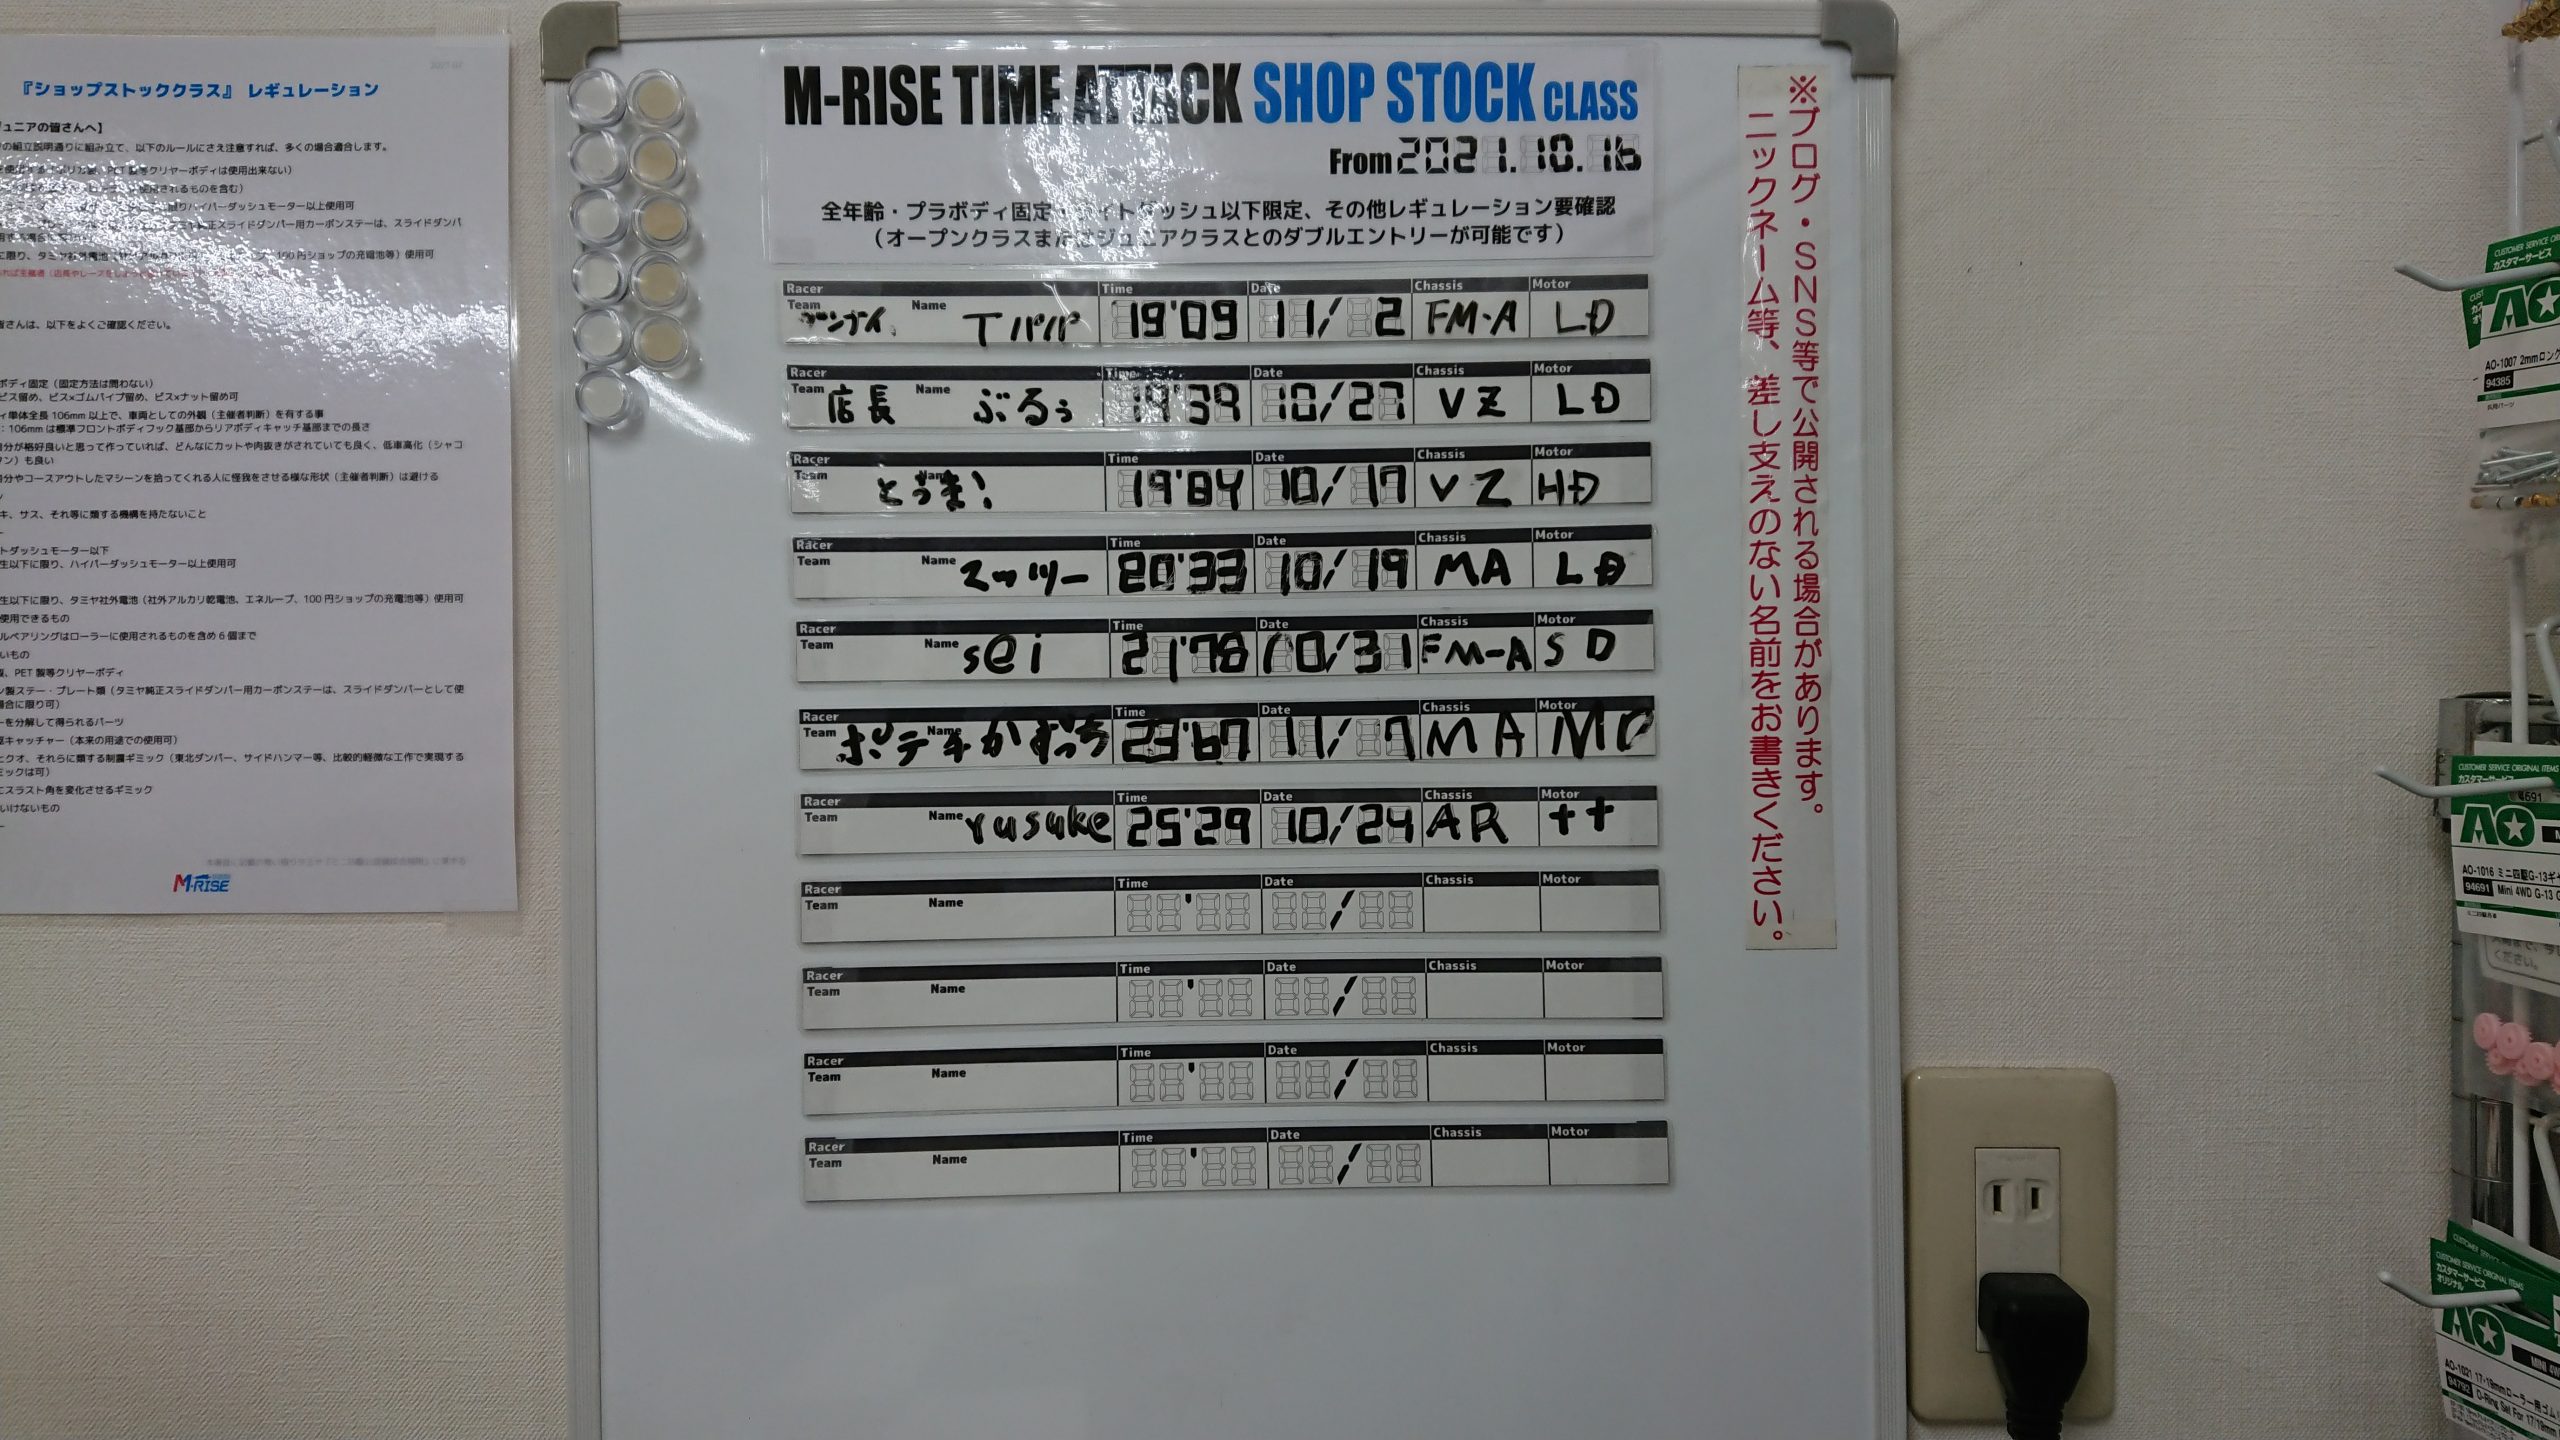 Result 2021 10th Shop stock